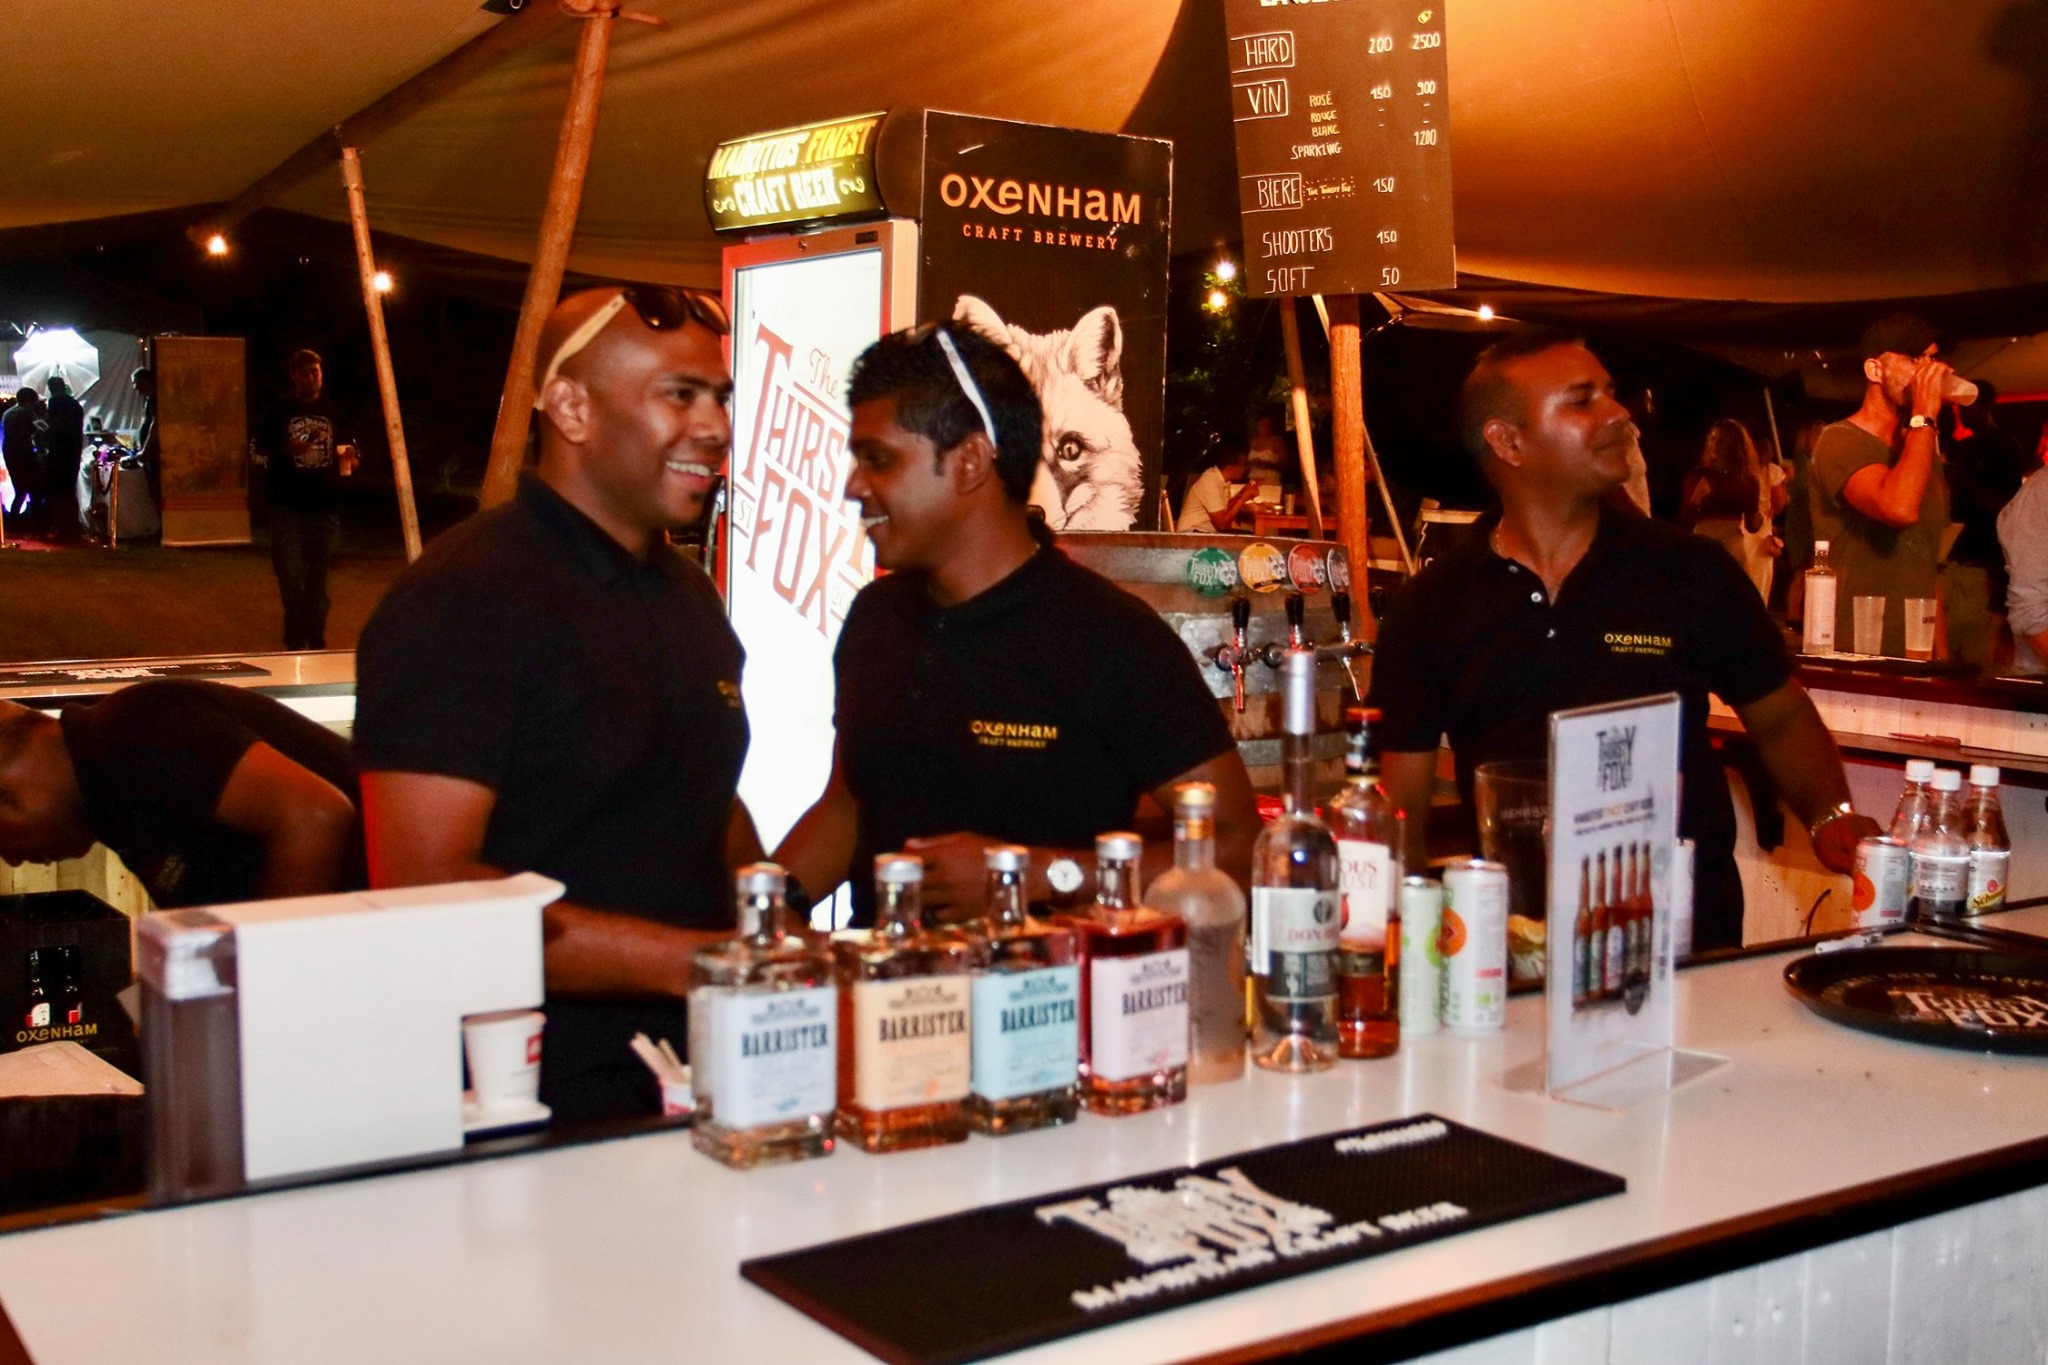 Barrister gin conquered Mauritius